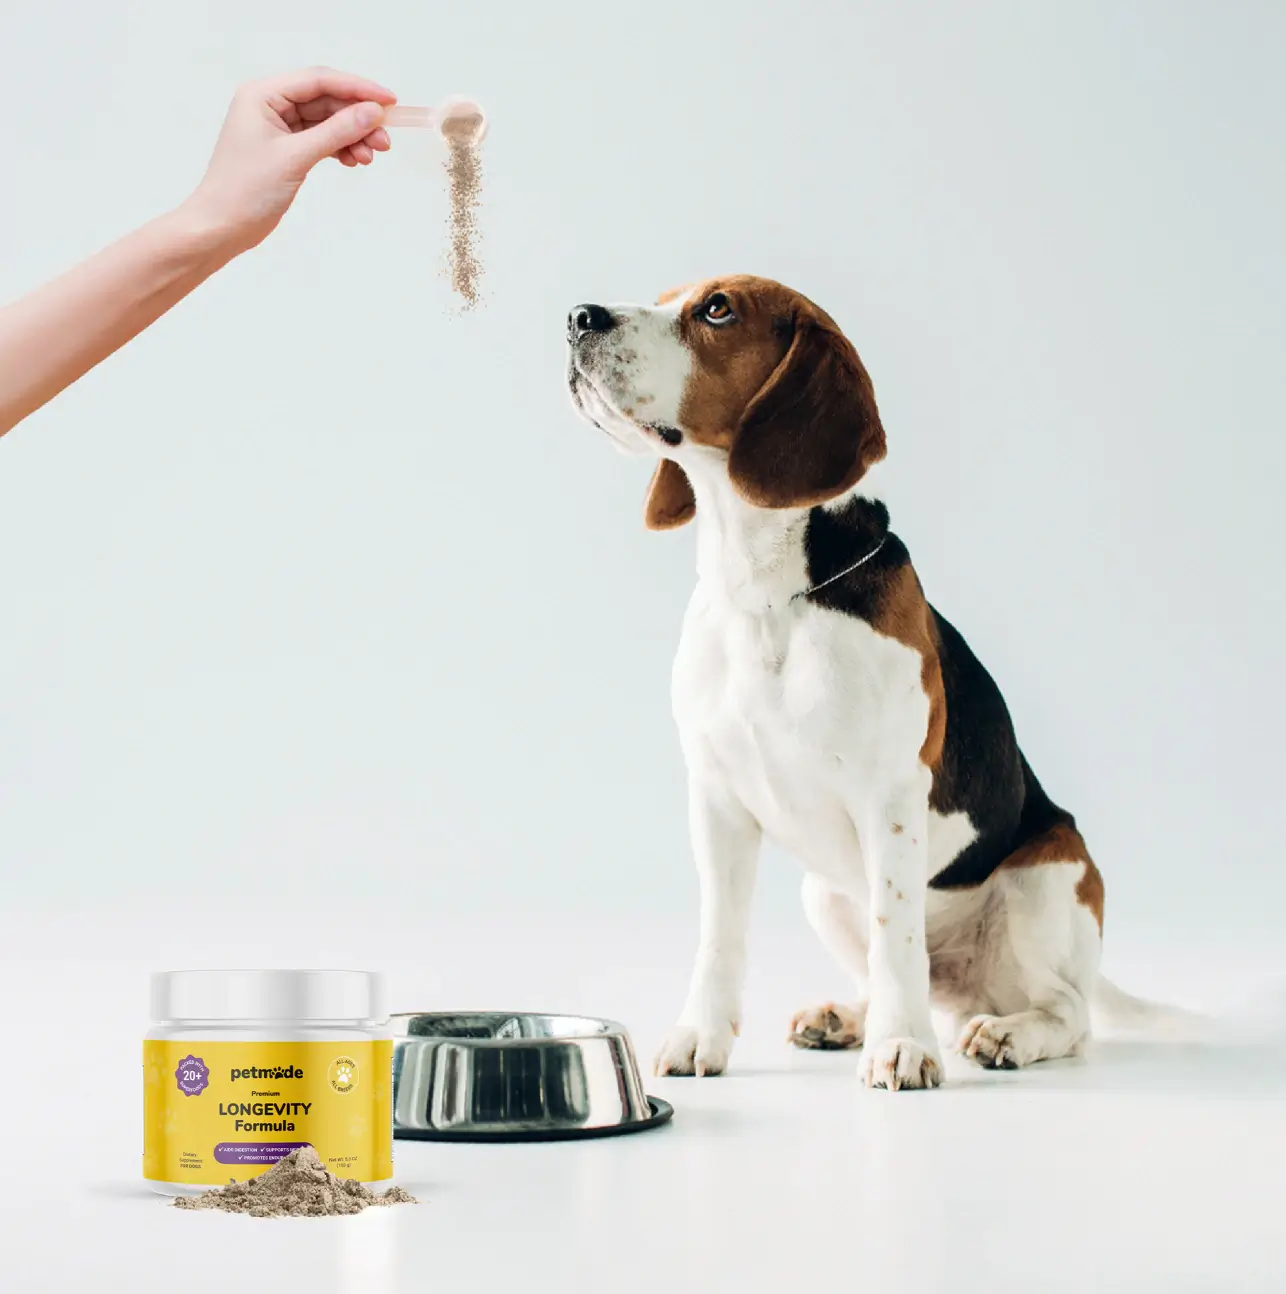 A beagle dog looking attentively at a scoop held by a person